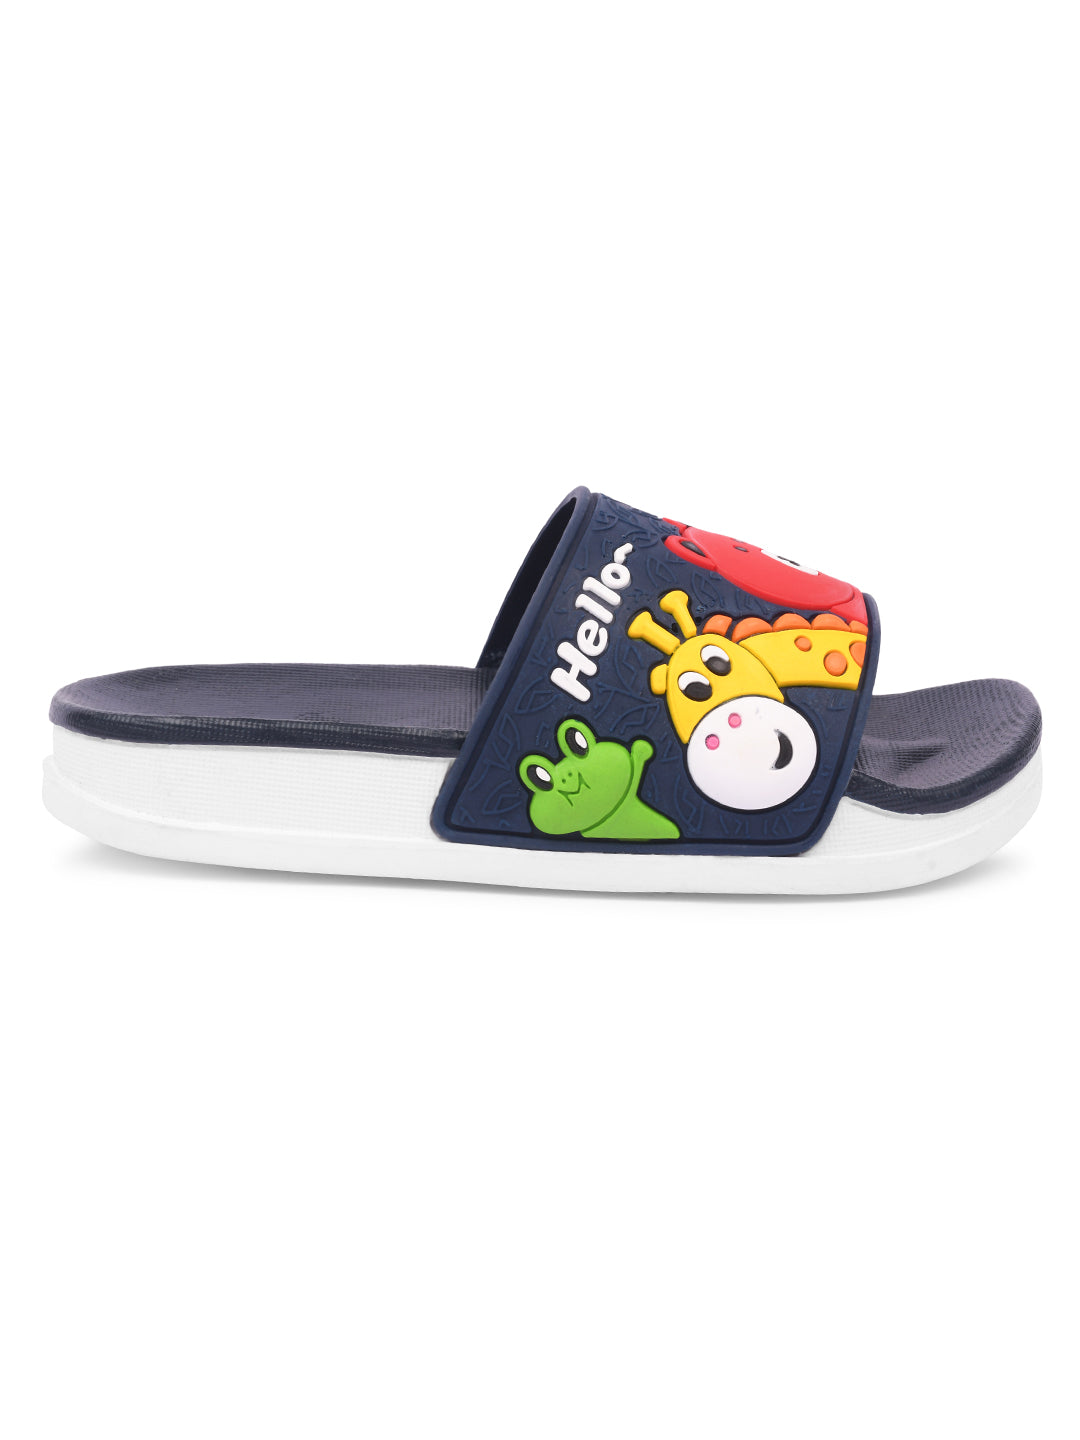 KATS Coco-106 Navy Synthetic Solid Slippers Flipflop for Kids (3 Years to 5 Years)